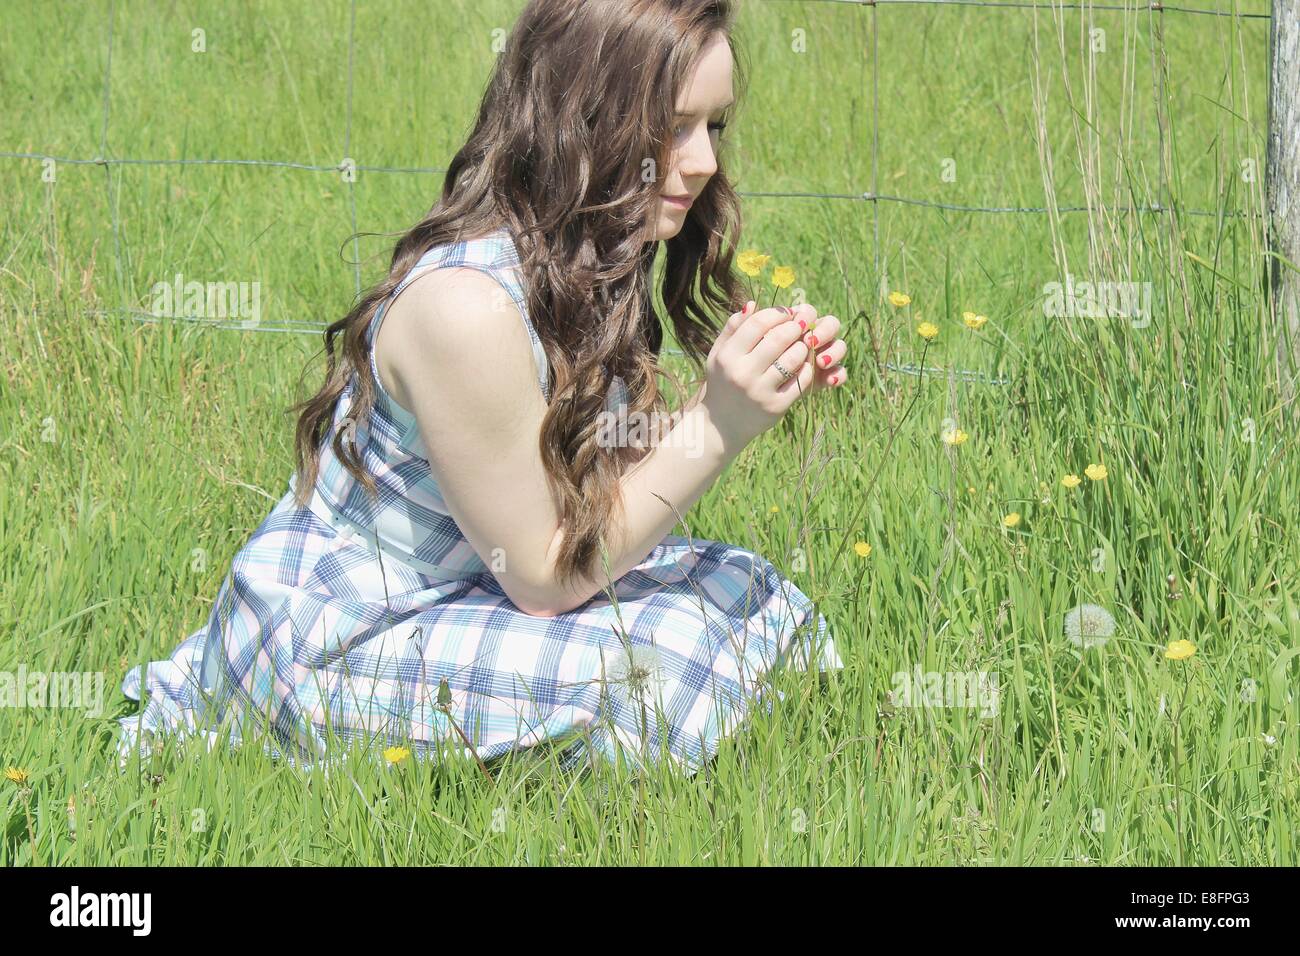 Teenage girl sitting in a meadow picking flowers Stock Photo